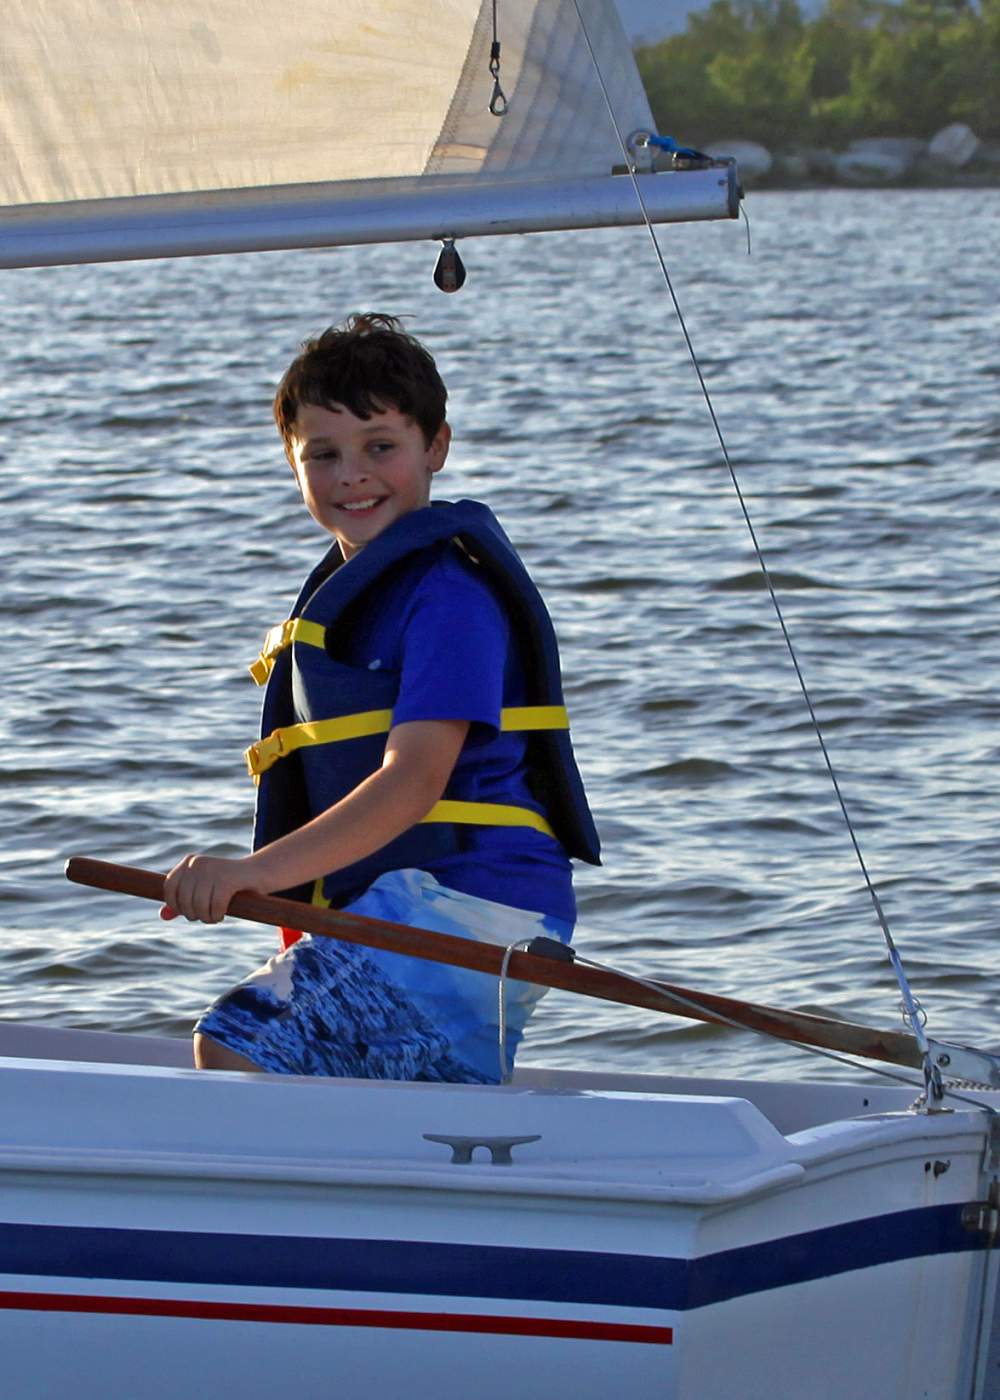 Young boy smiling while sailing